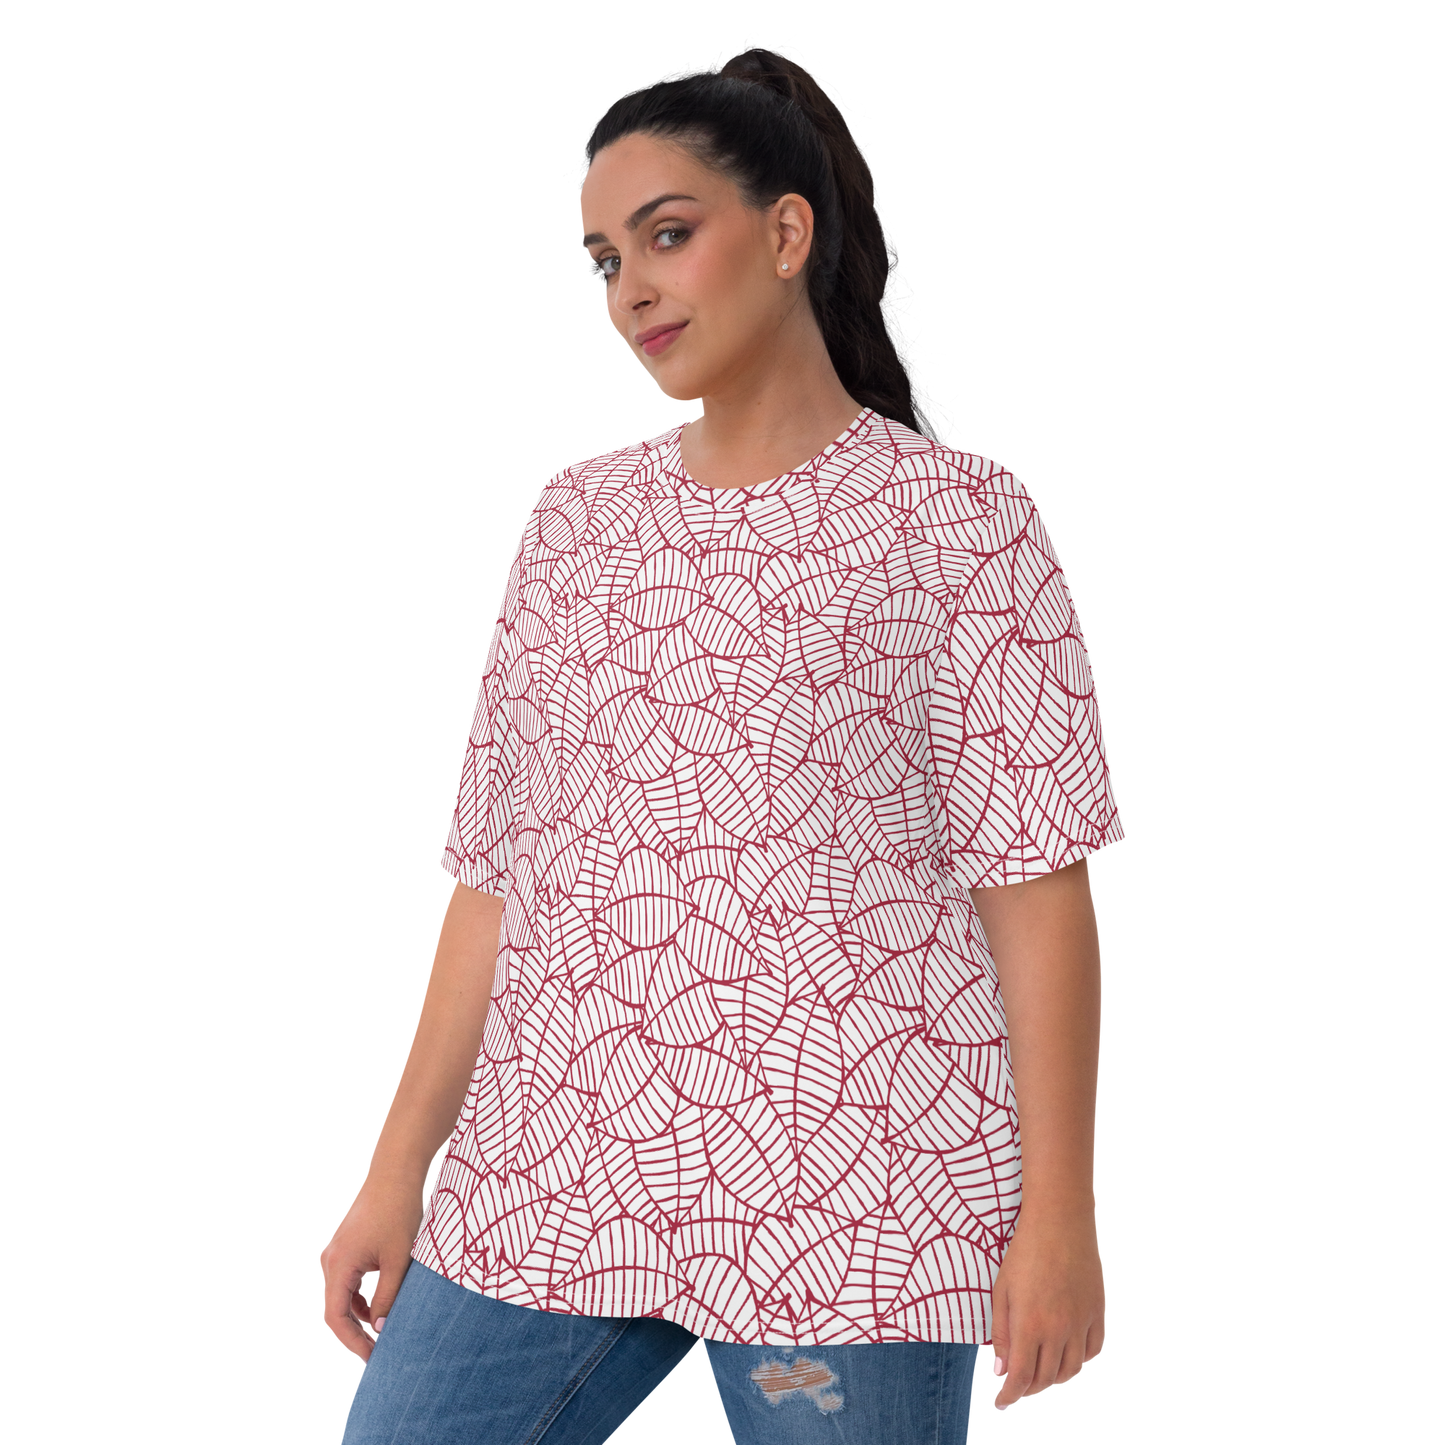 Colorful Fall Leaves | Seamless Patterns | All-Over Print Women's Crew Neck T-Shirt - #8